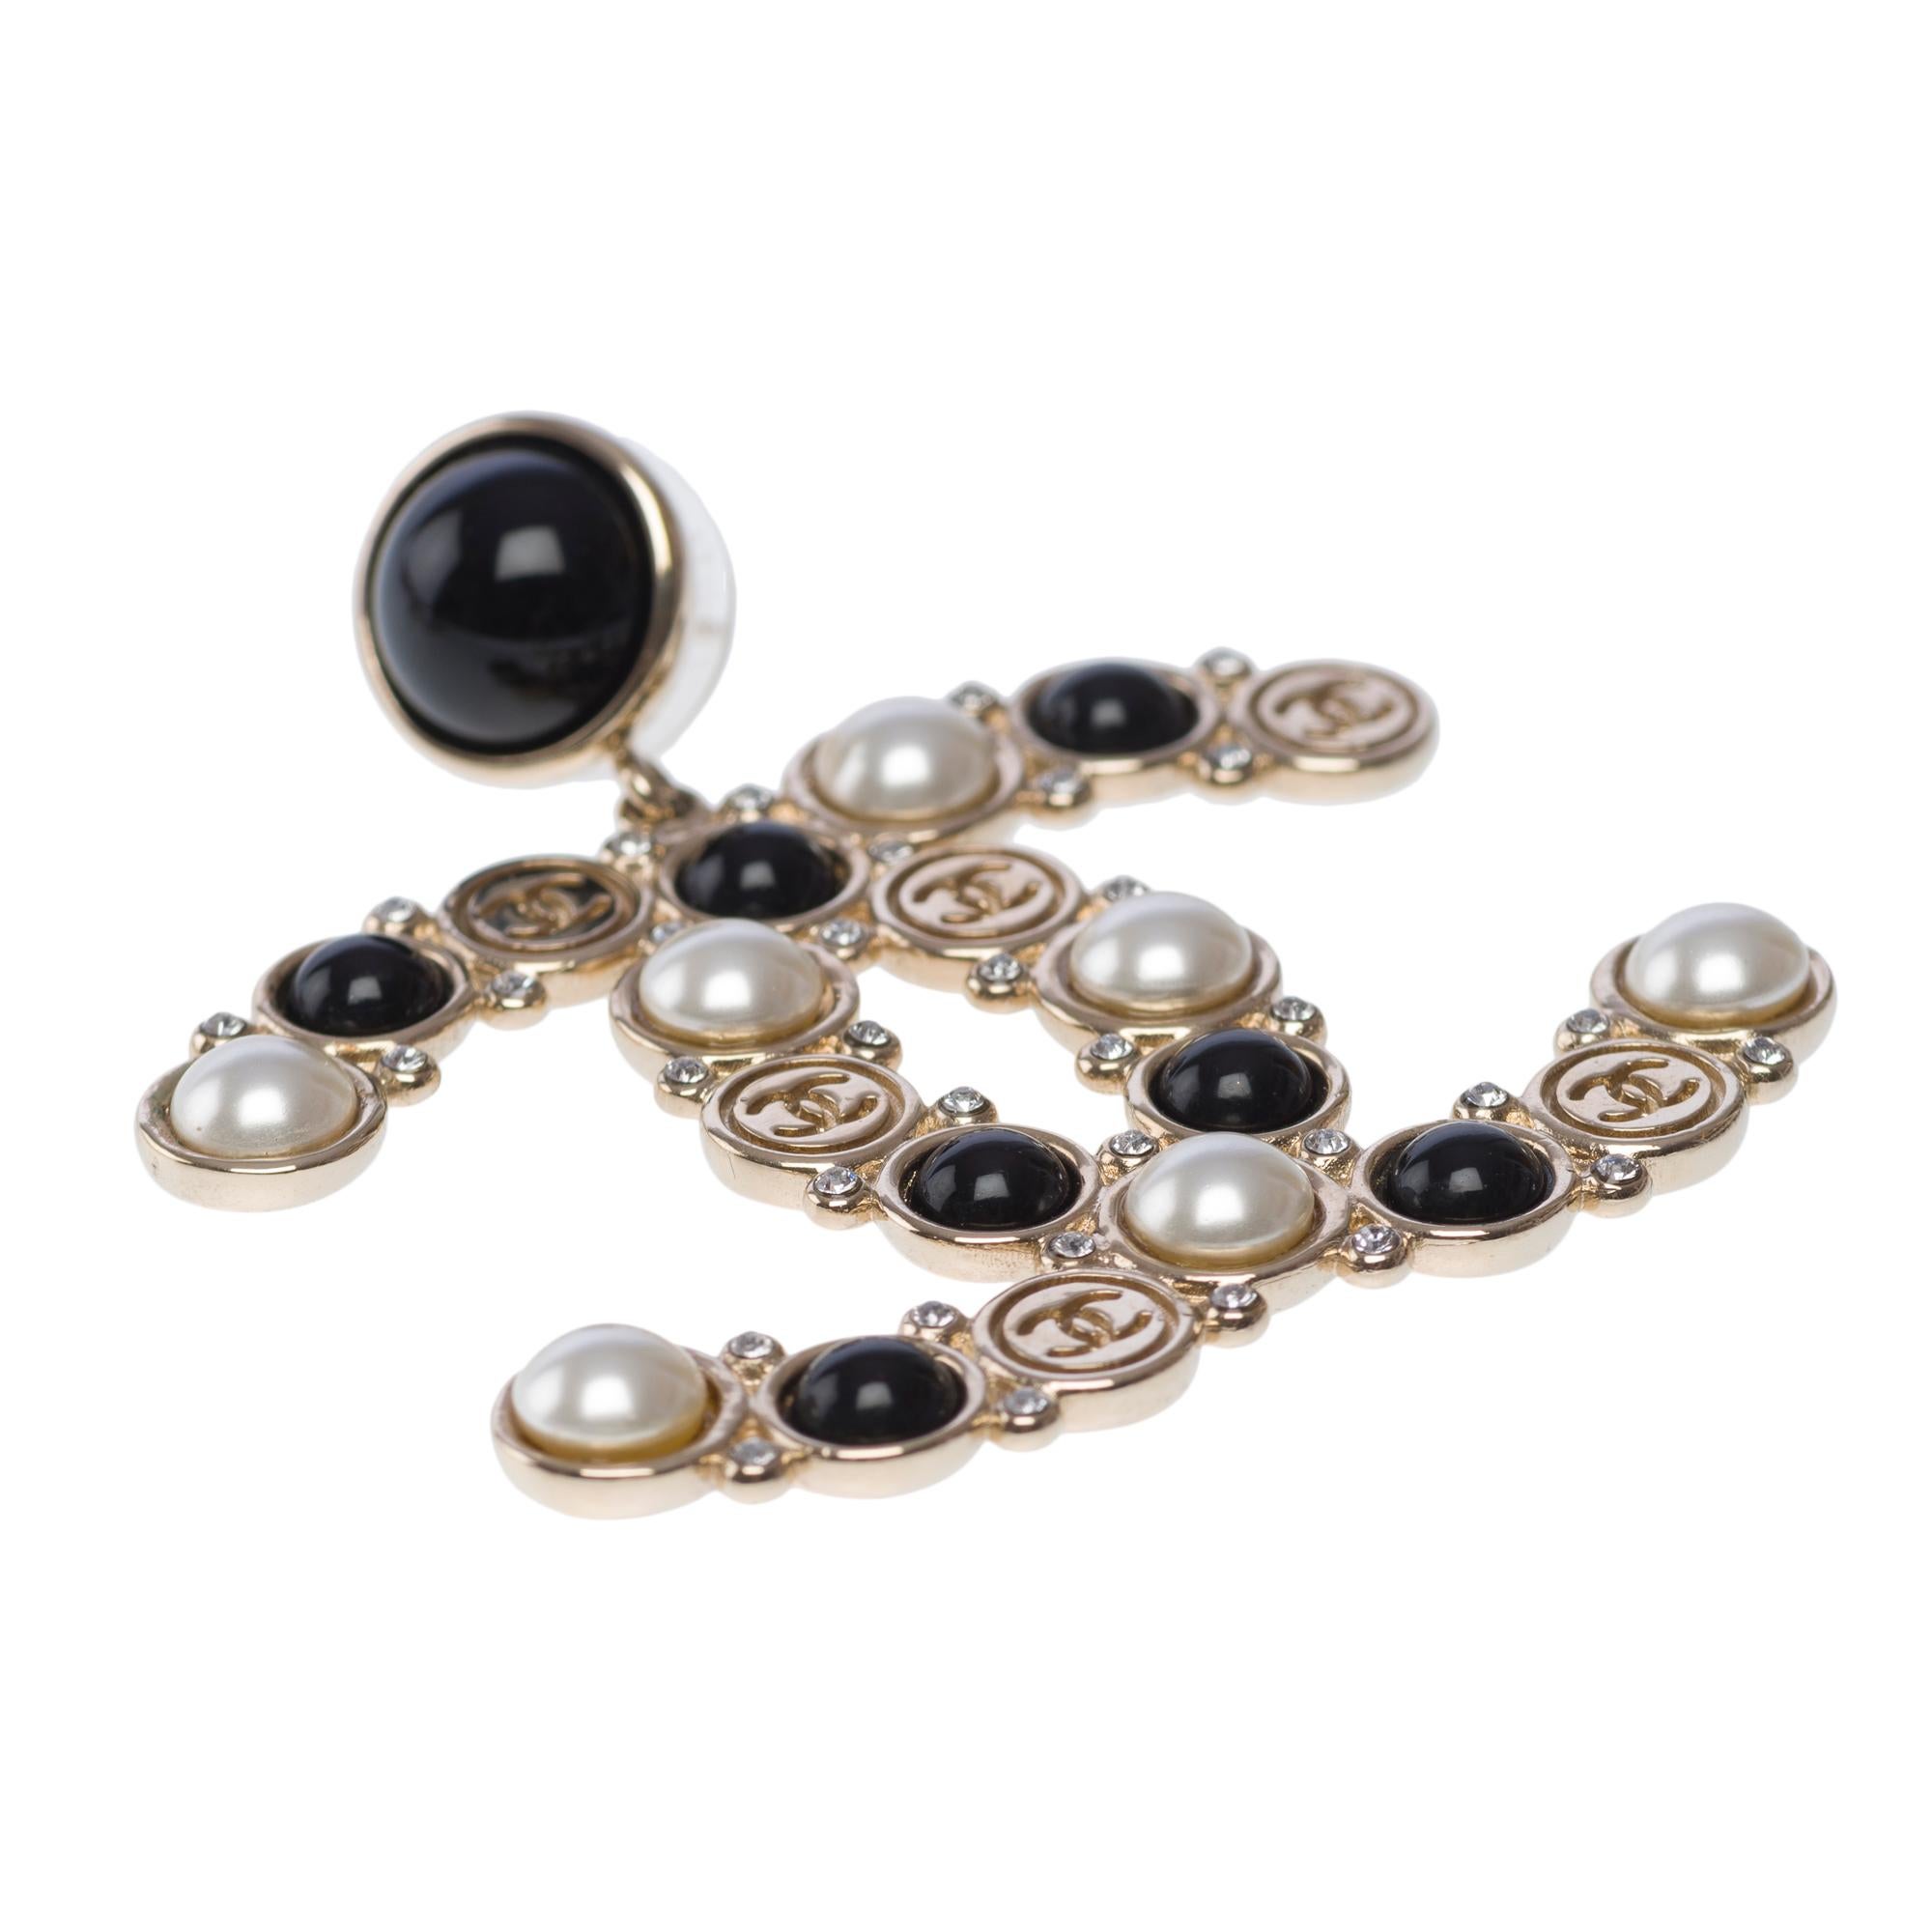 Contemporary Chanel Earrings topped with faux pearls, rhinestones and resin, SHW